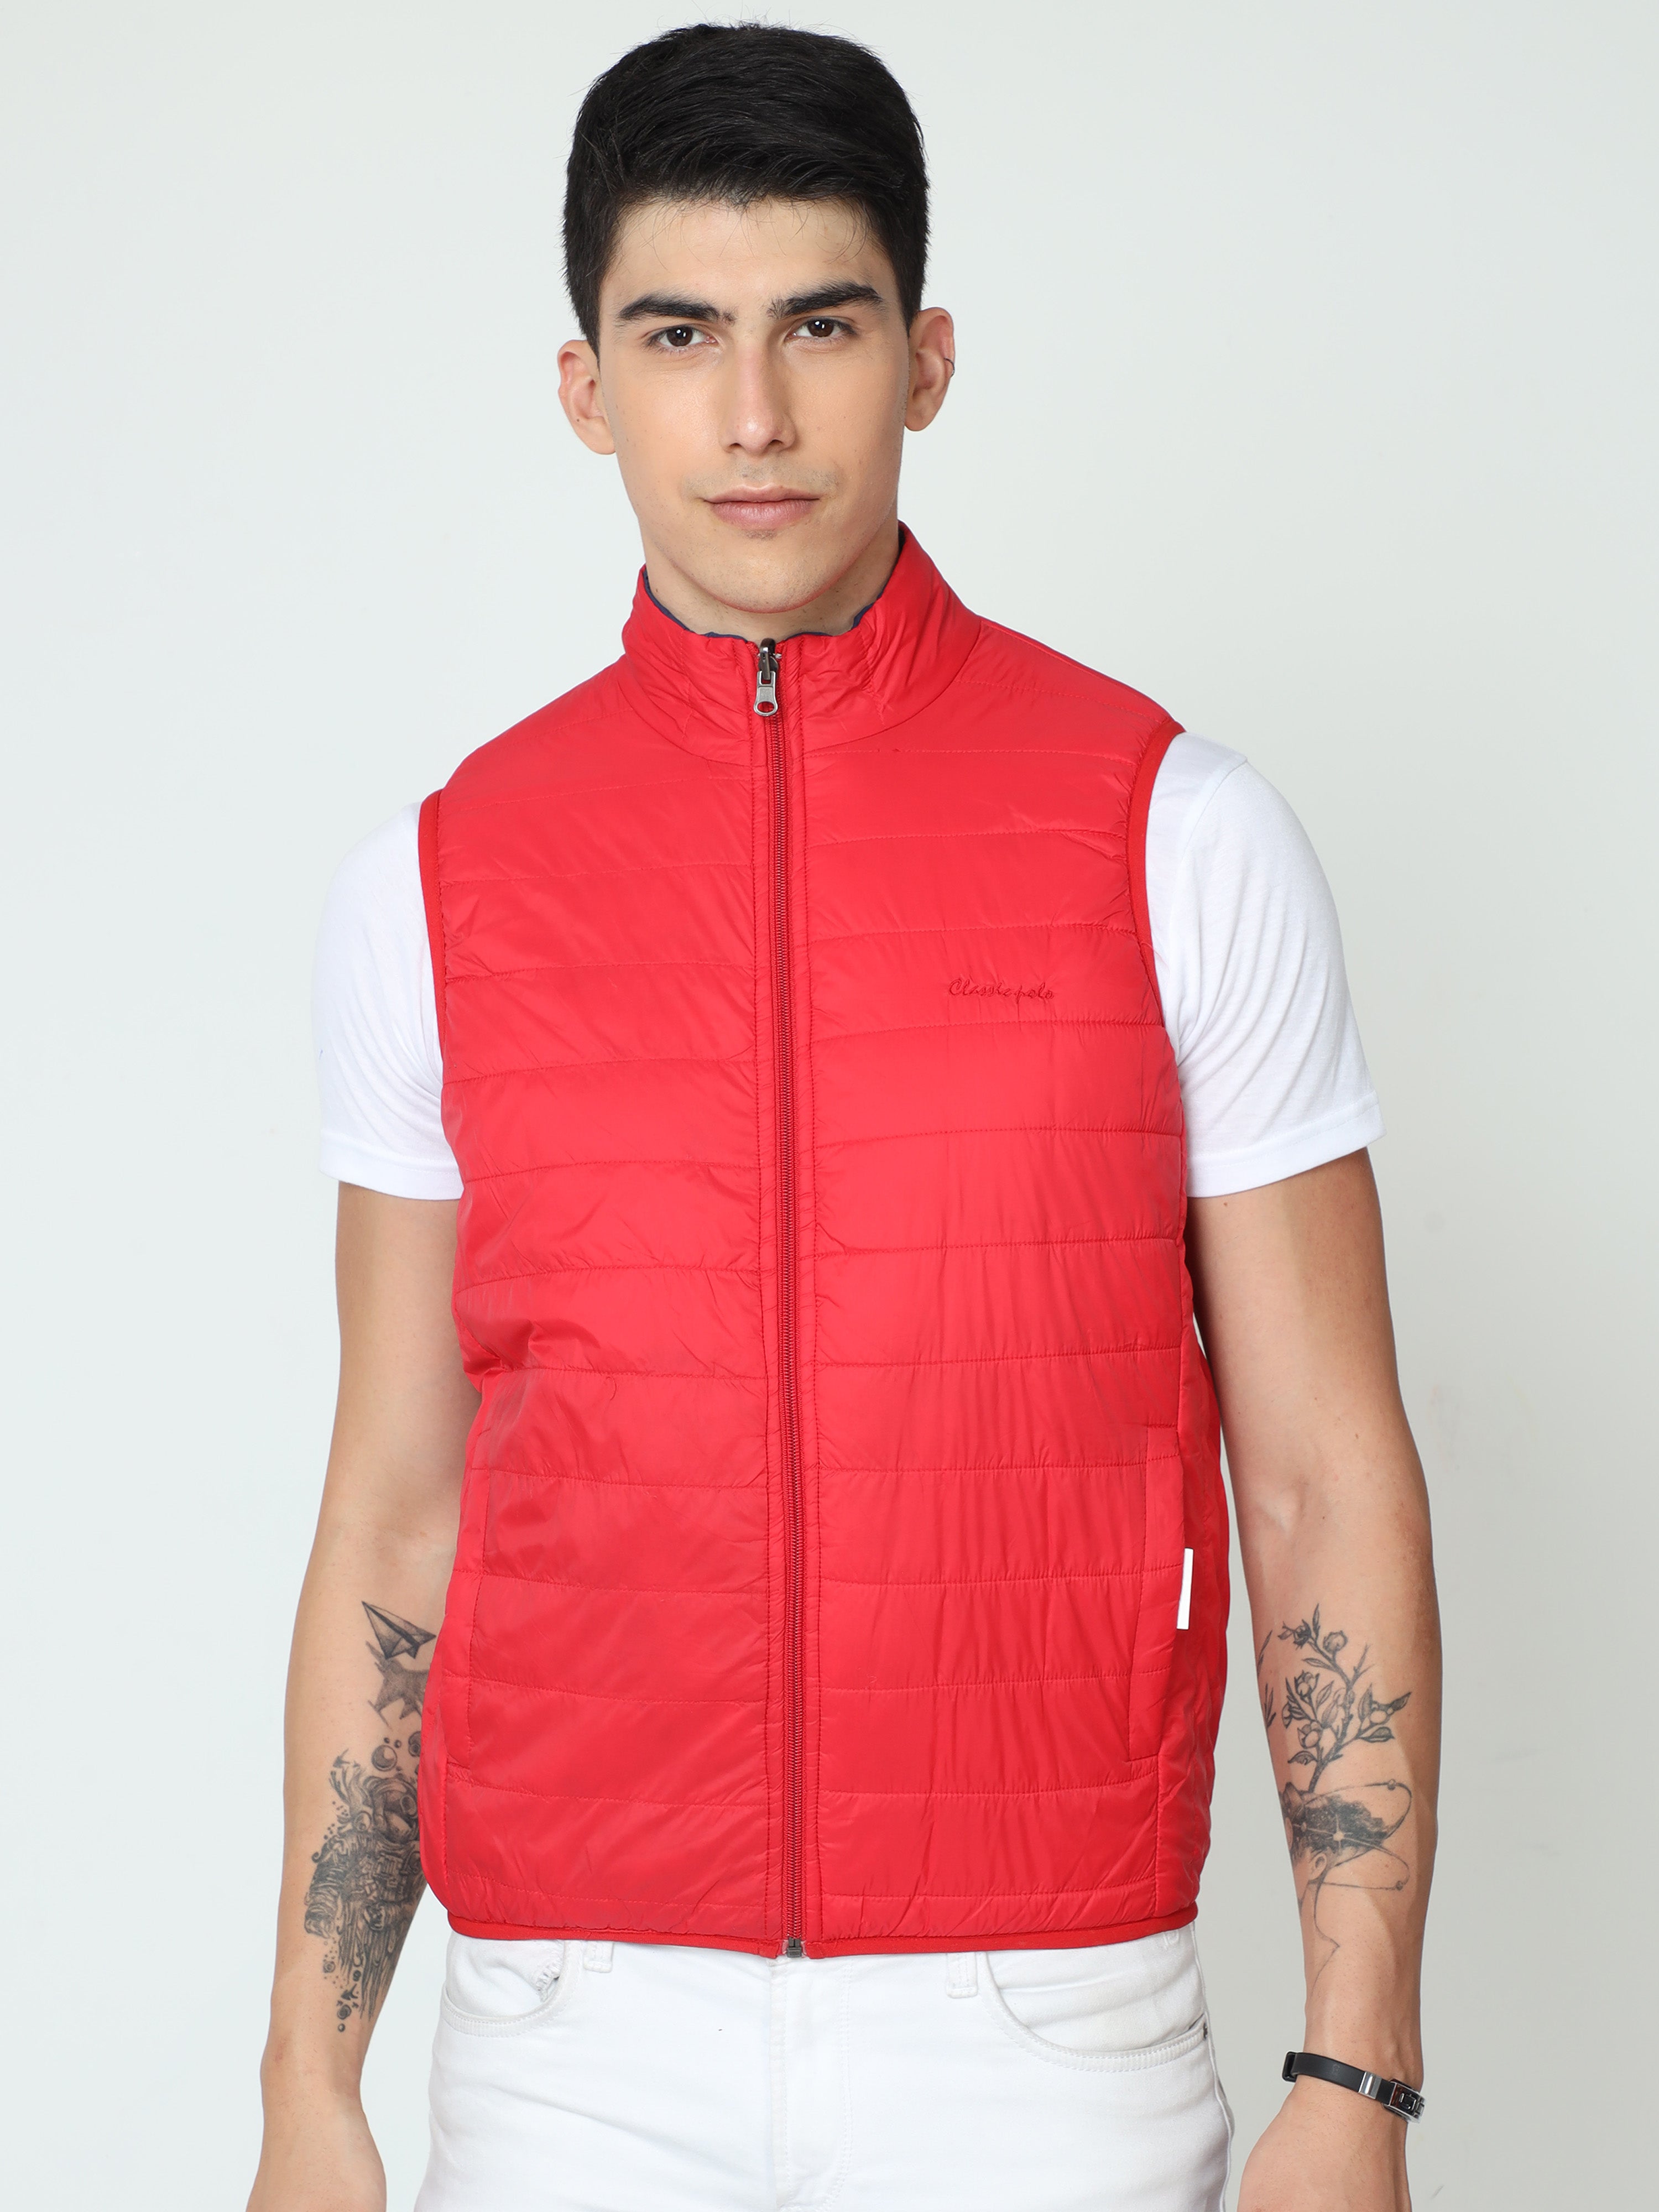 Classic Polo Mens 100% Cotton Red & Black Solid Crew Neck Sleeveless Slim Fit Jackets |Cp-Jkt-Sl-02